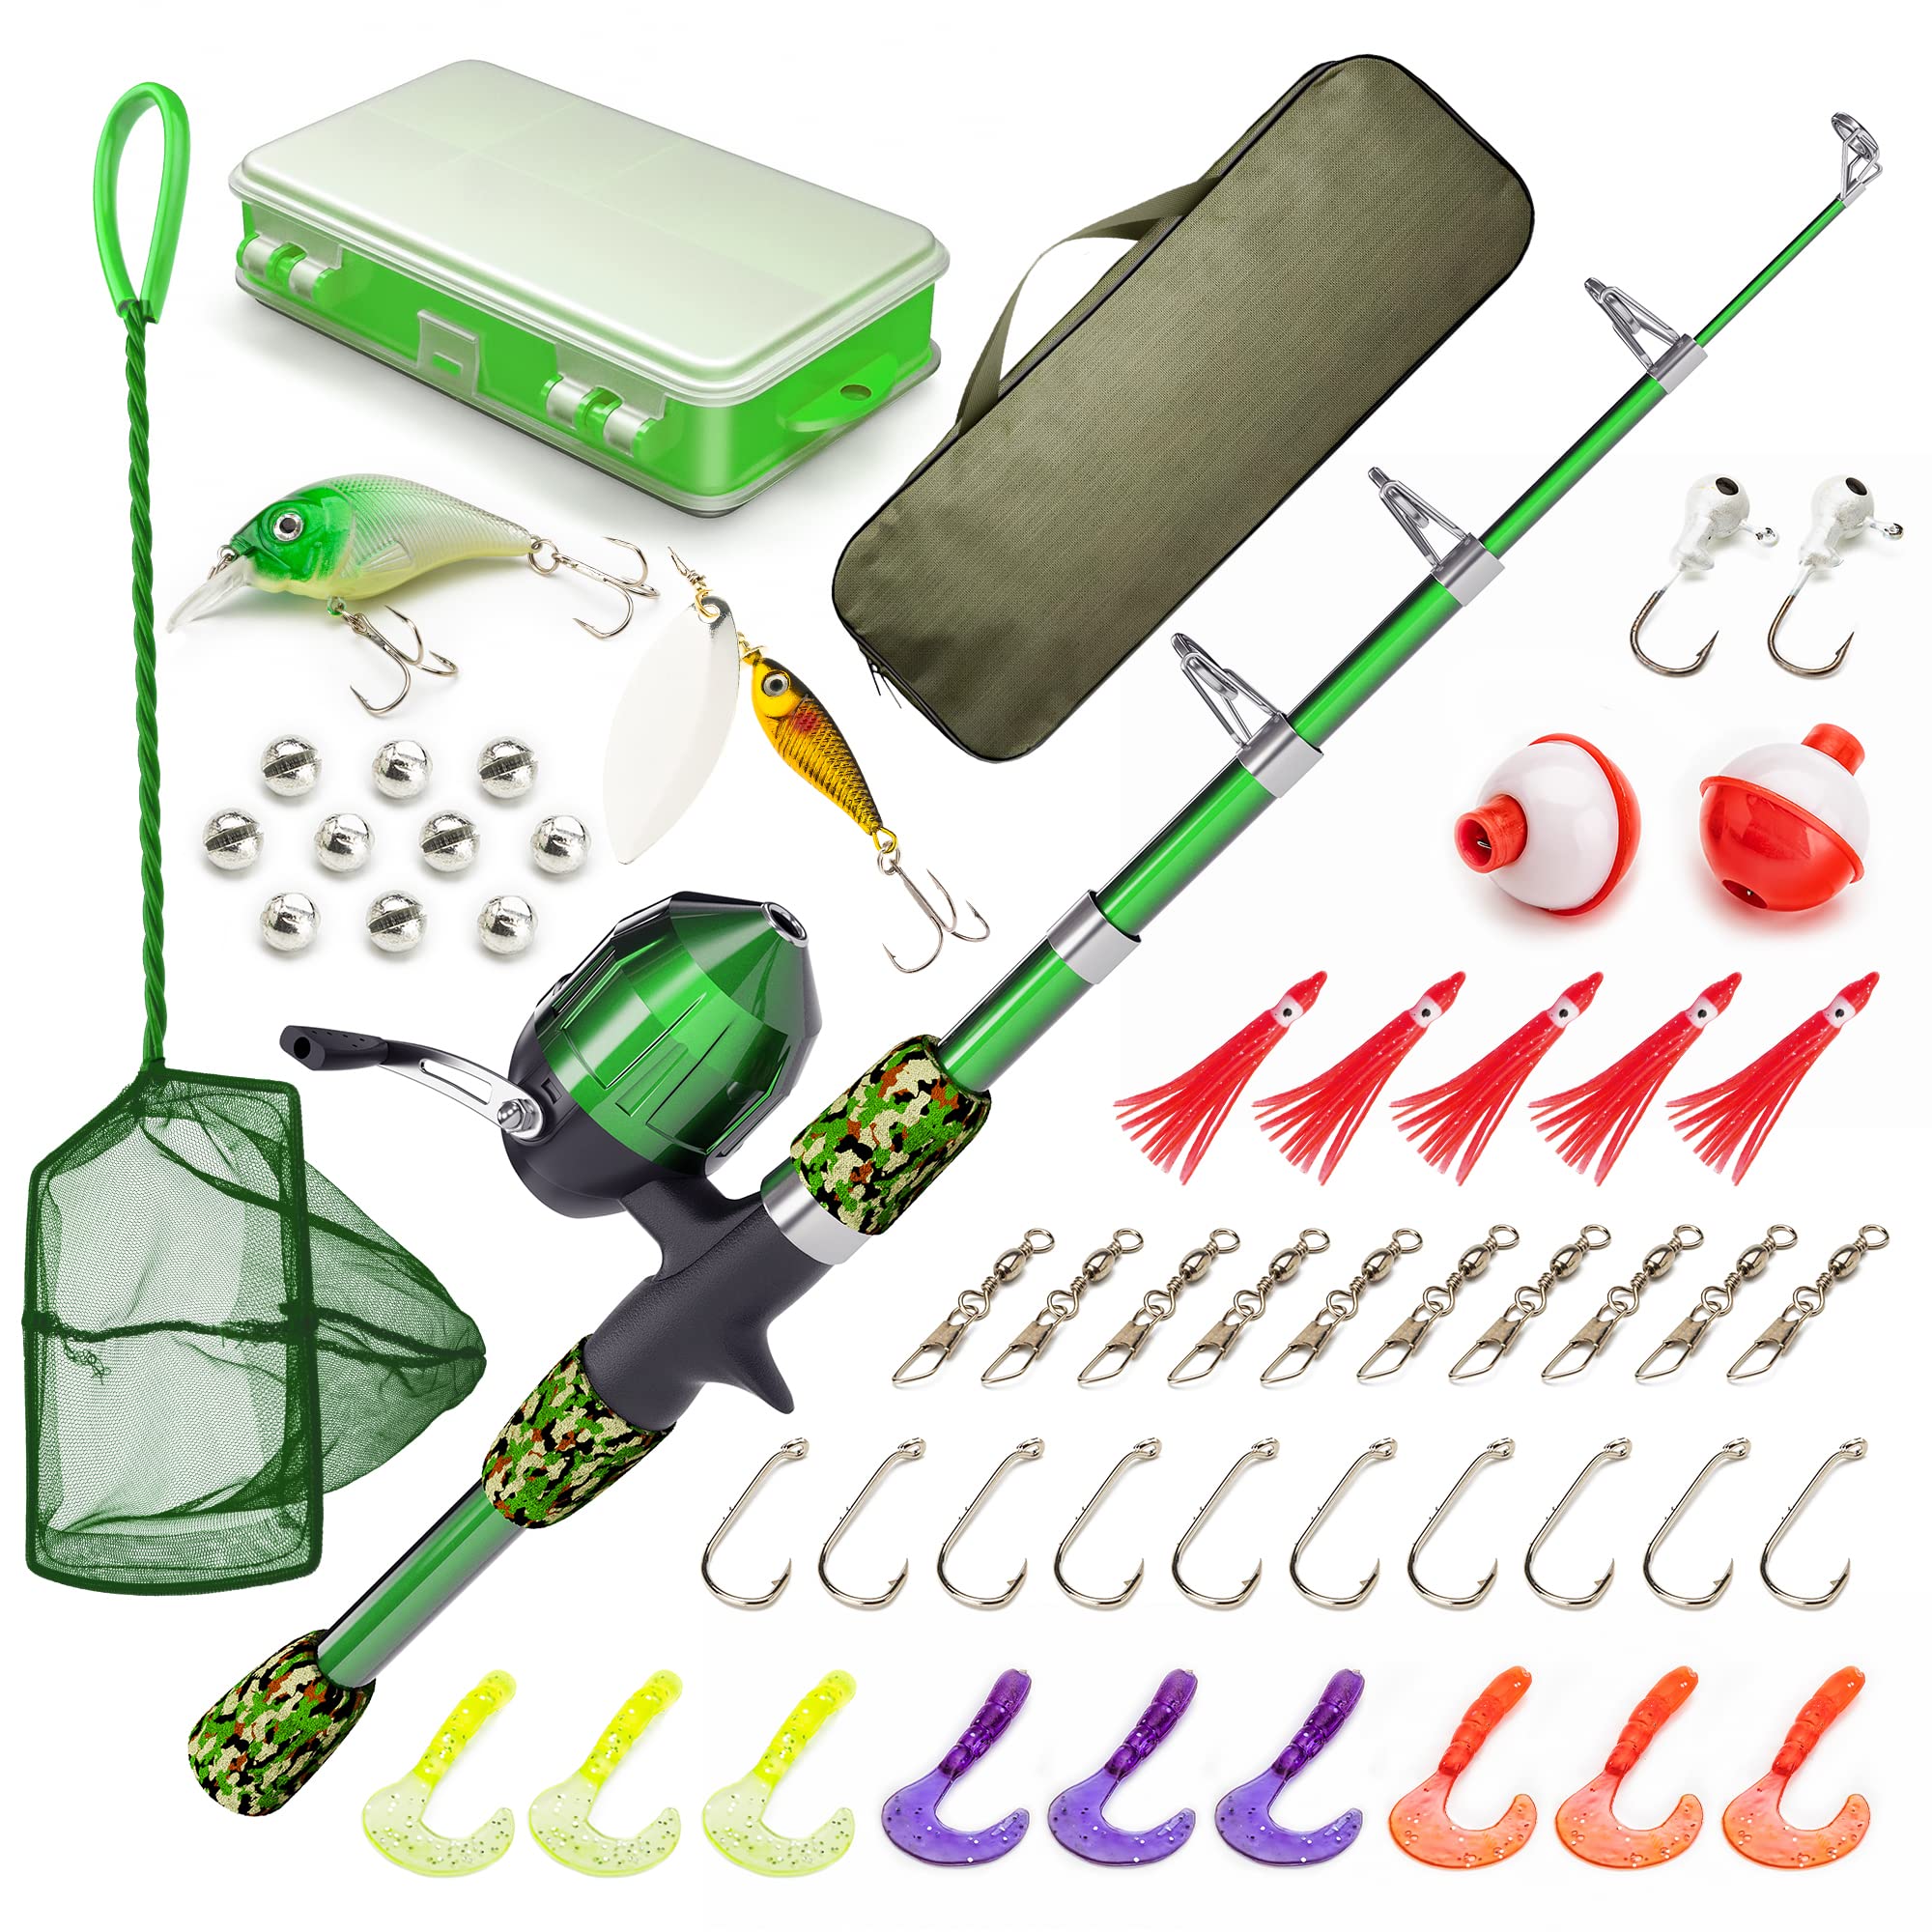 Lanaak Kids Fishing Pole and Tackle Box - with Net, Travel Bag, Reel and Beginner’s Guide - Rod and Reel Kit for Boys, Girls, or